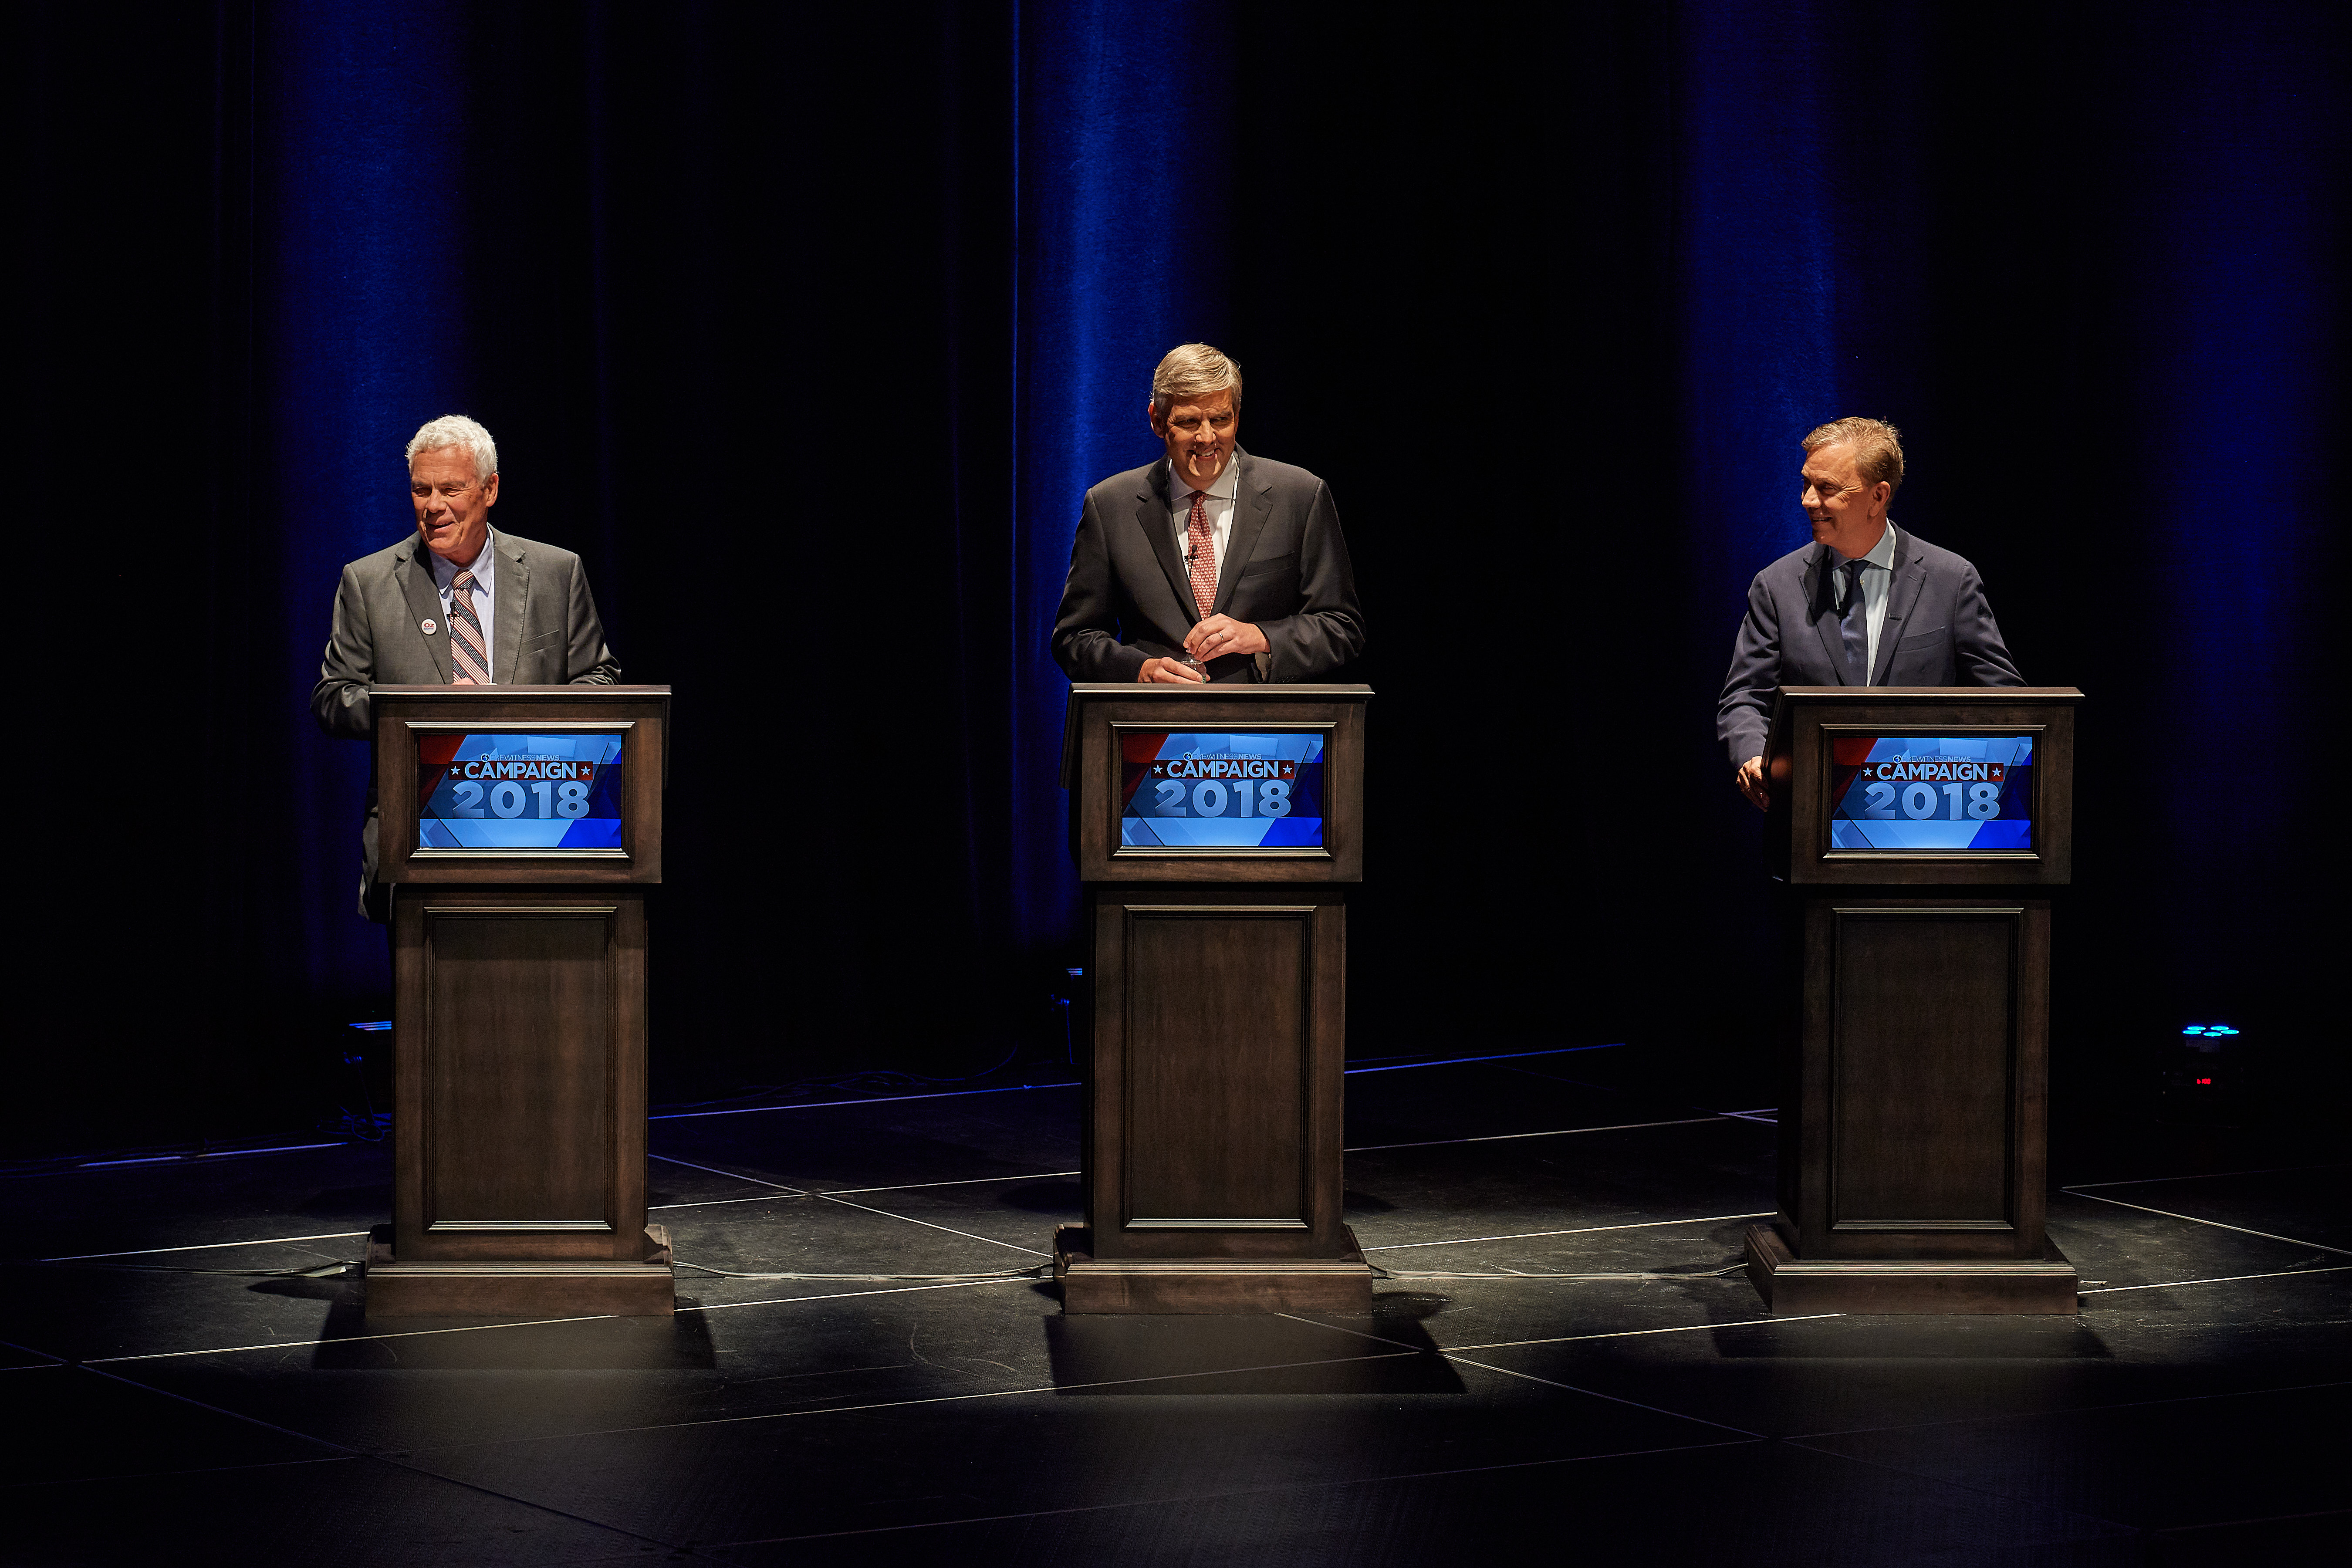 Candidates Oz Griebel, left, Bob Stefanowski, and Ned Lamont laugh as the gubernatorial debate starts at the Jorgensen Center for the Performing Arts on Sept. 26, 2018. (Peter Morenus/UConn Photo)